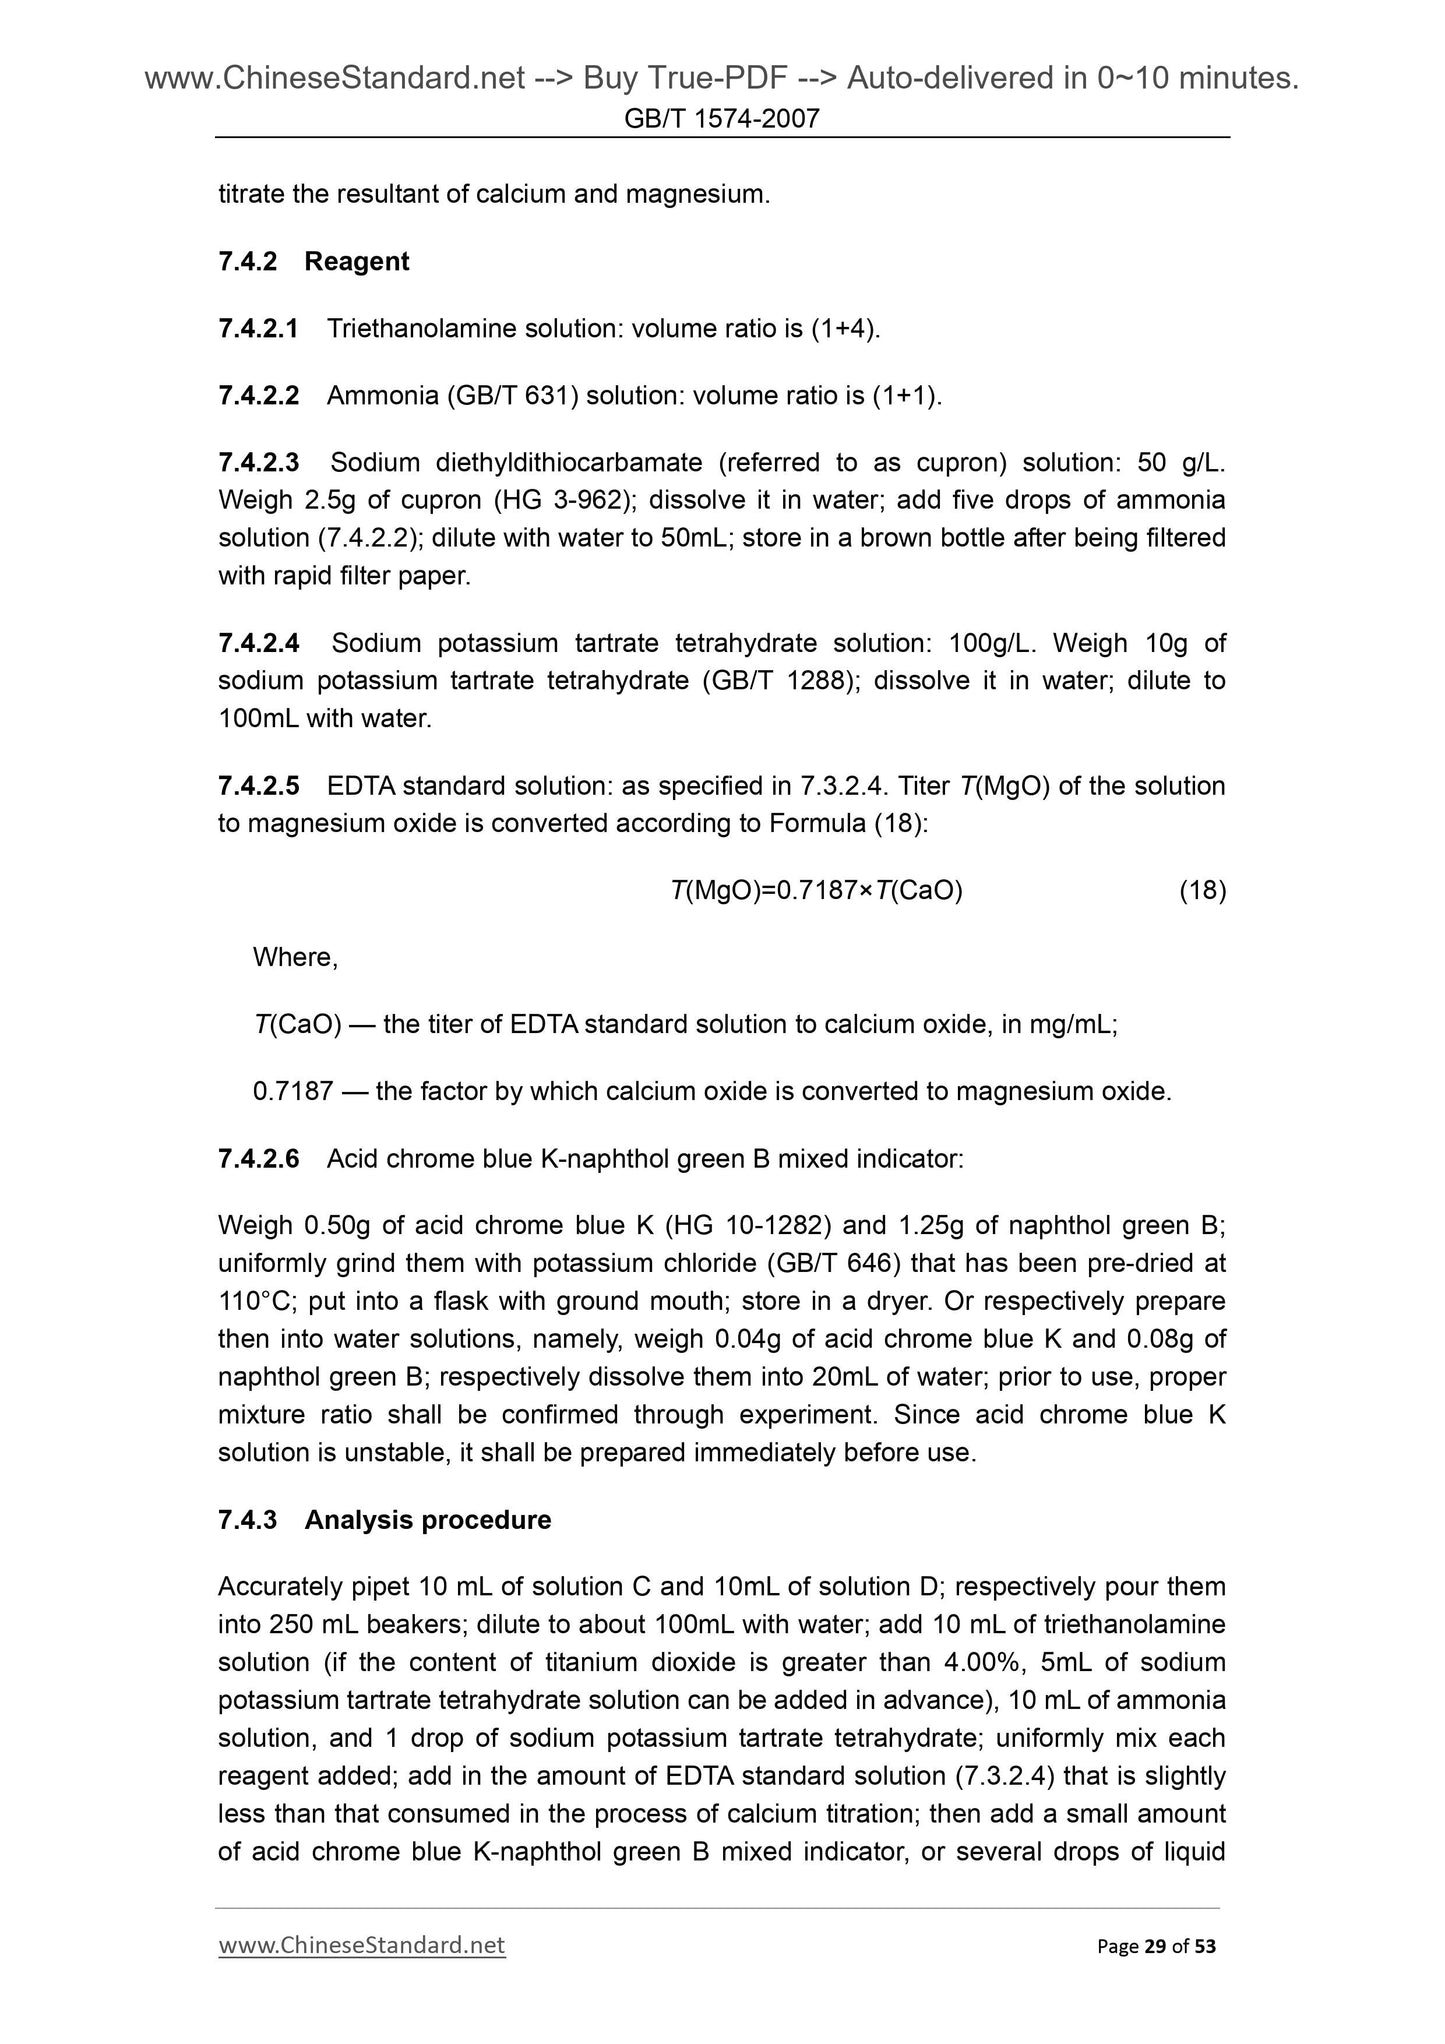 GB/T 1574-2007 Page 8